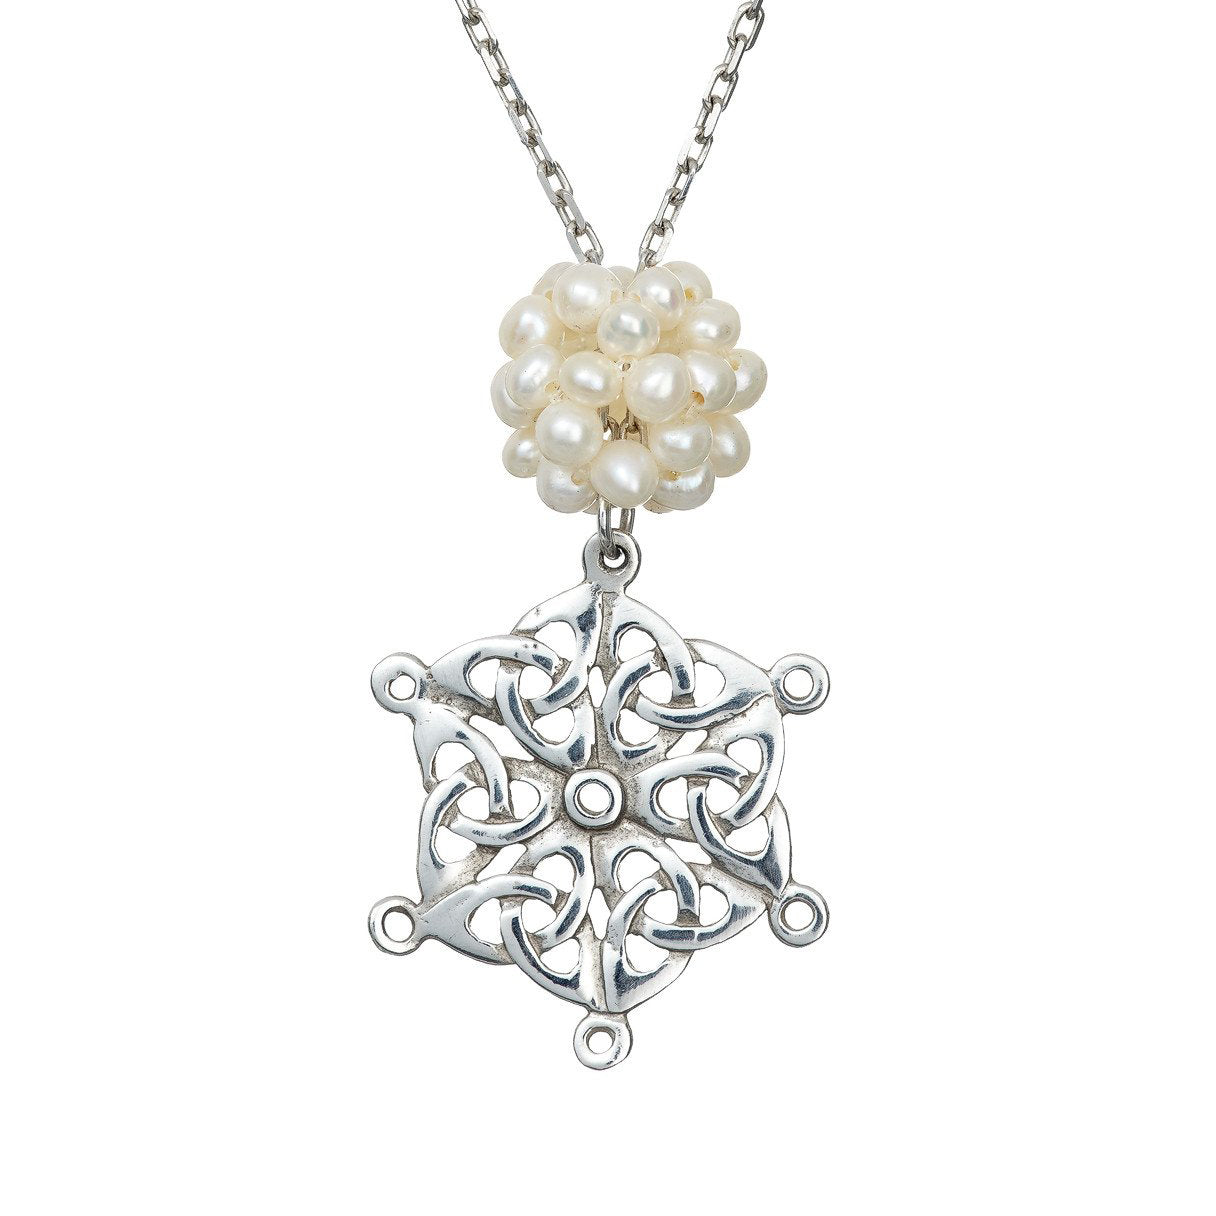 Celtic Snowflake Pendant handcrafted from Sterling Silver, complete with a Freshwater Pearl Snowball.